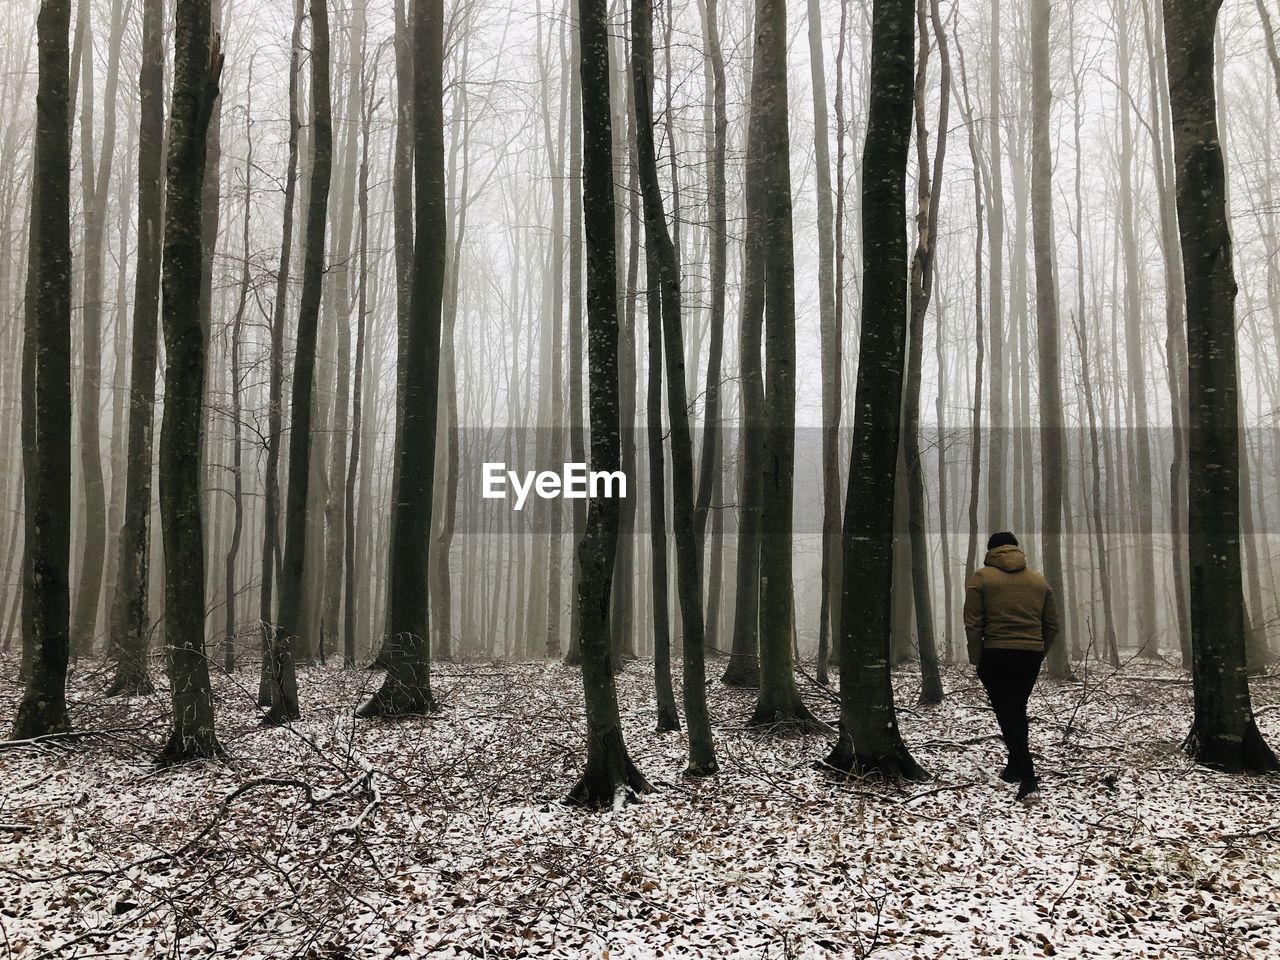 Man in a forest of bare trees surrounded by fog